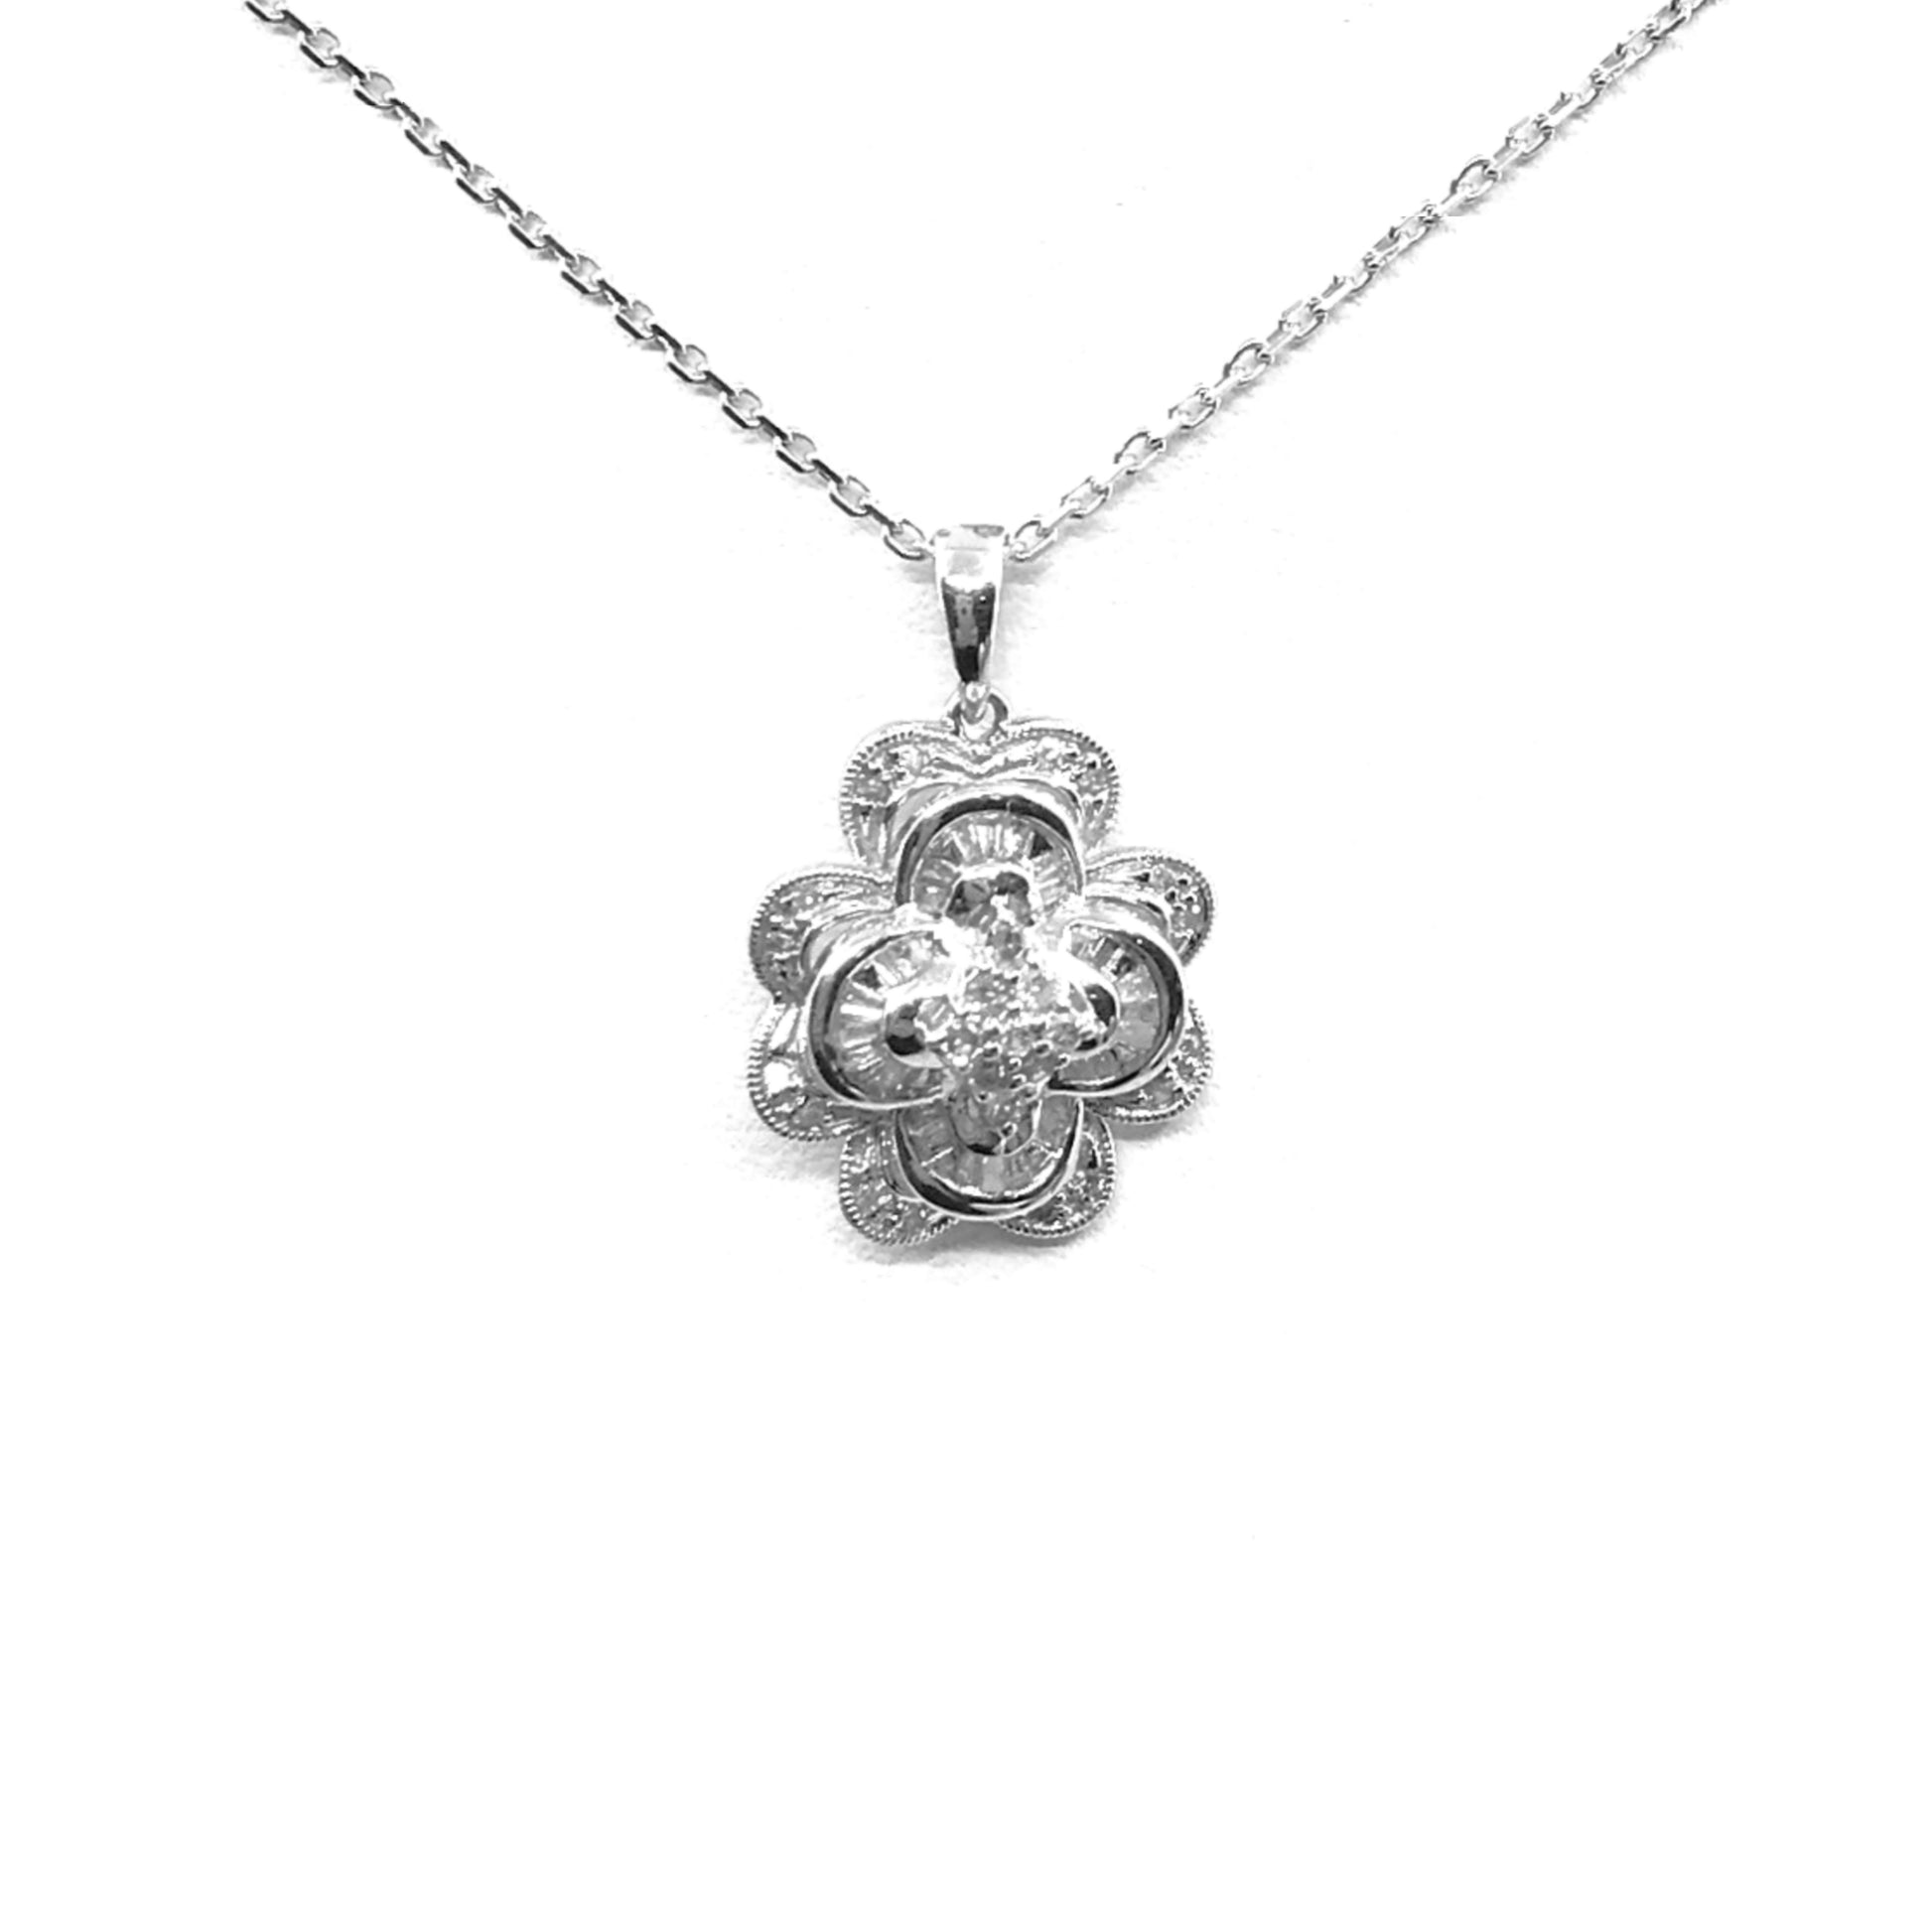 14K White Gold and Diamond Flower Pendant Necklace - HK Jewels